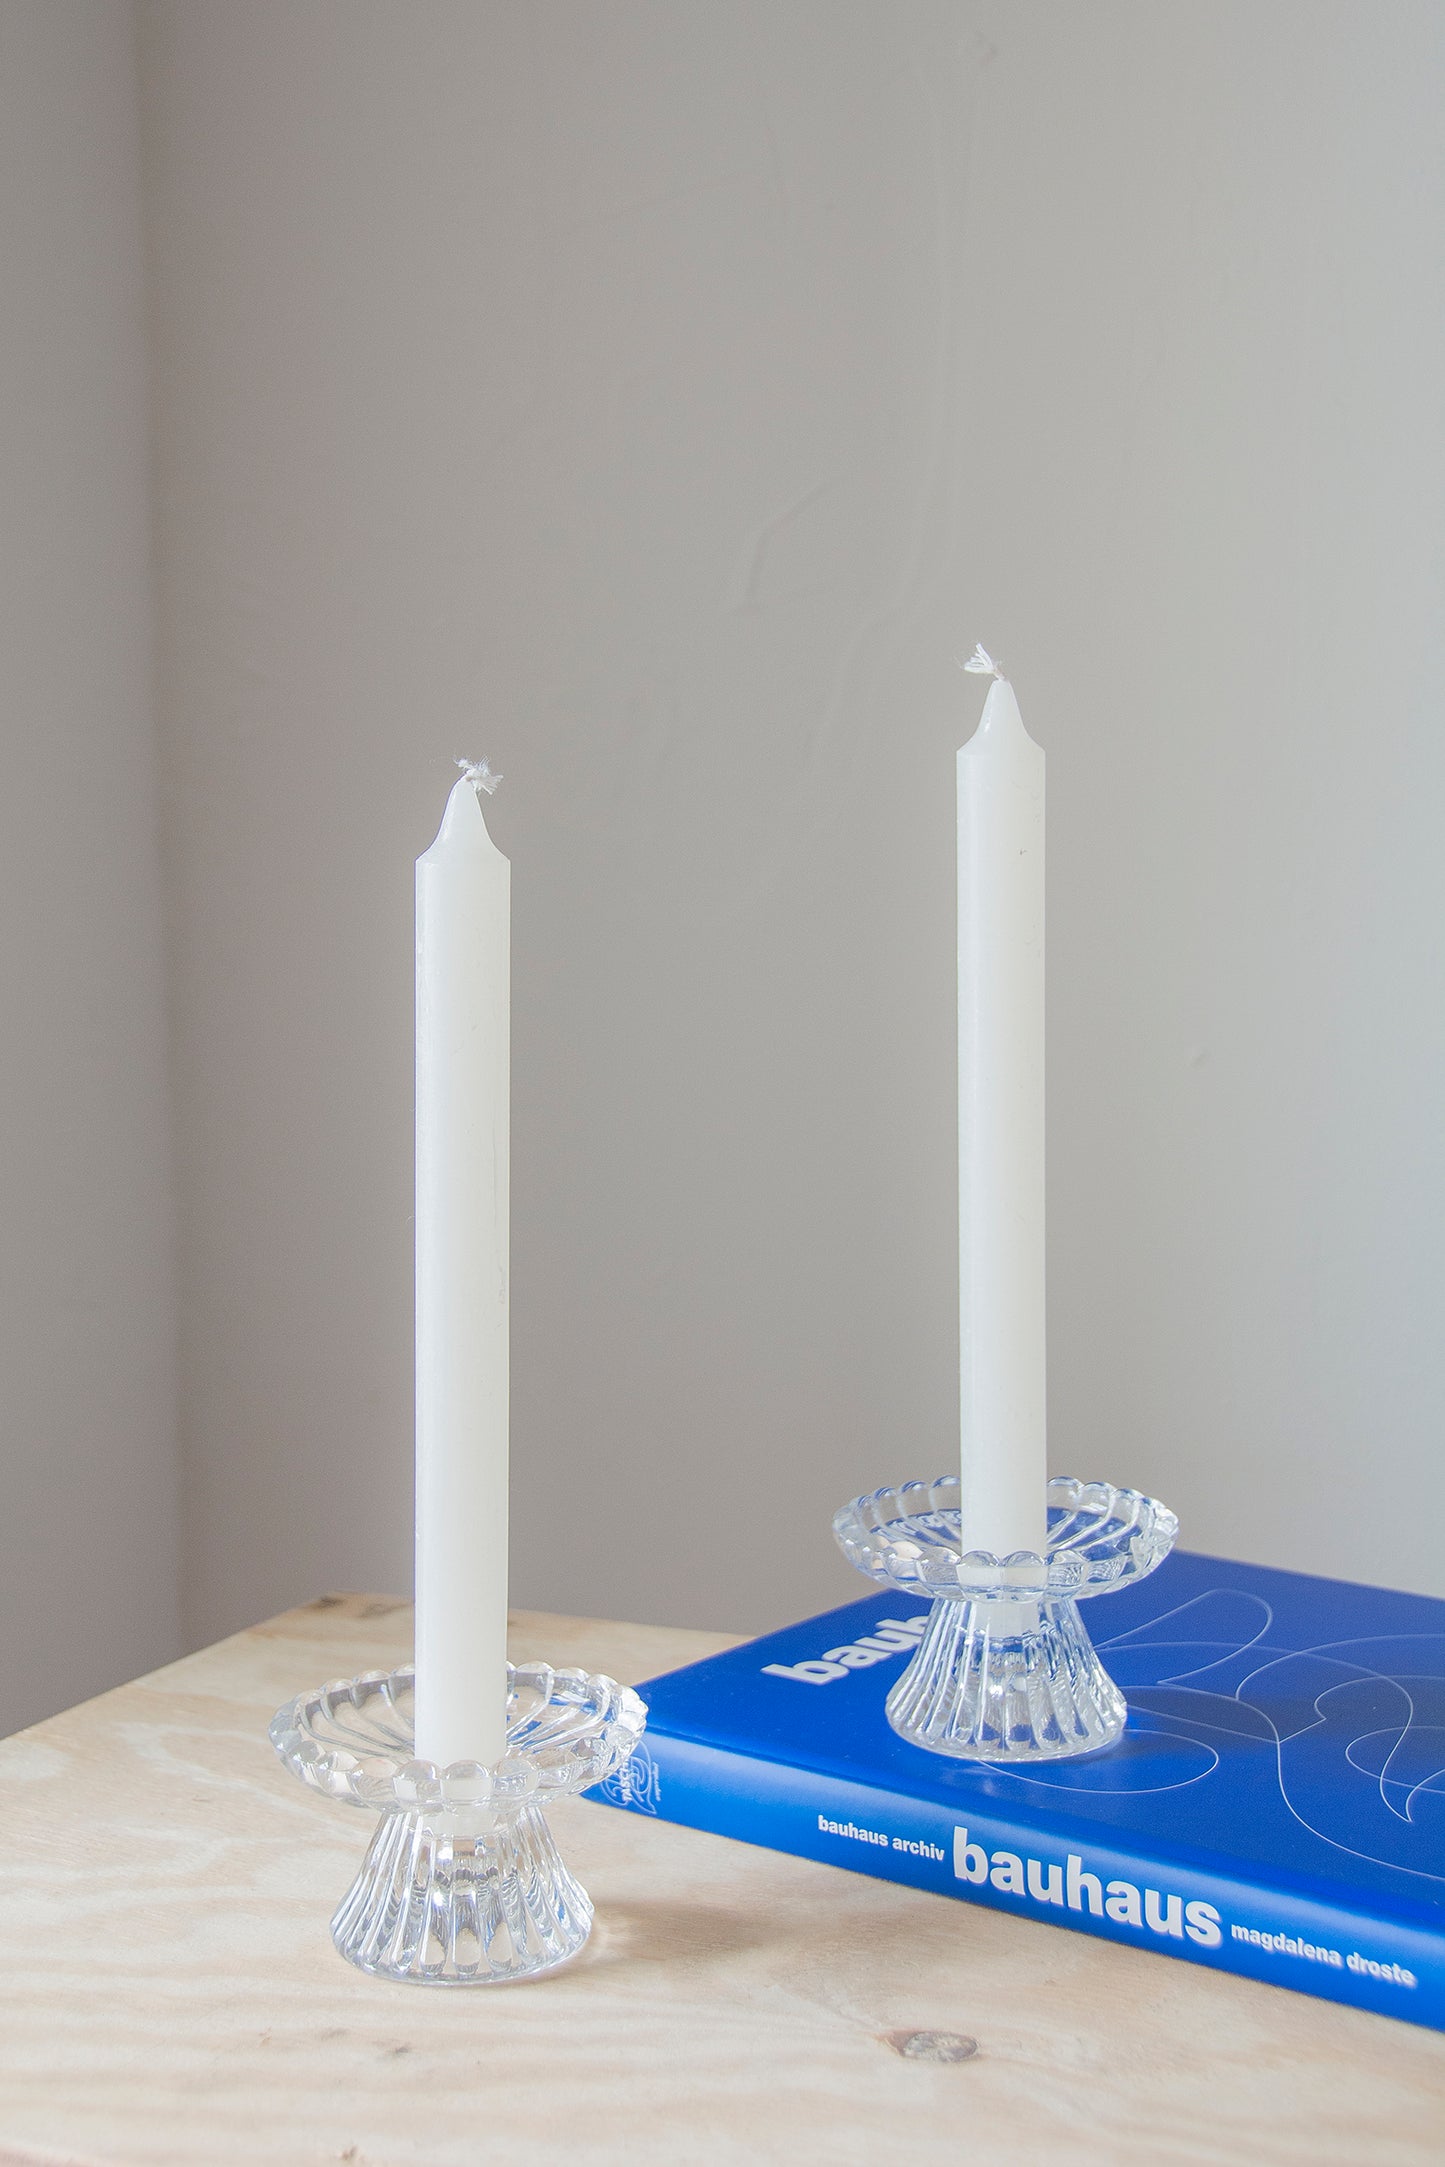 Twin Crystal Candle Holders